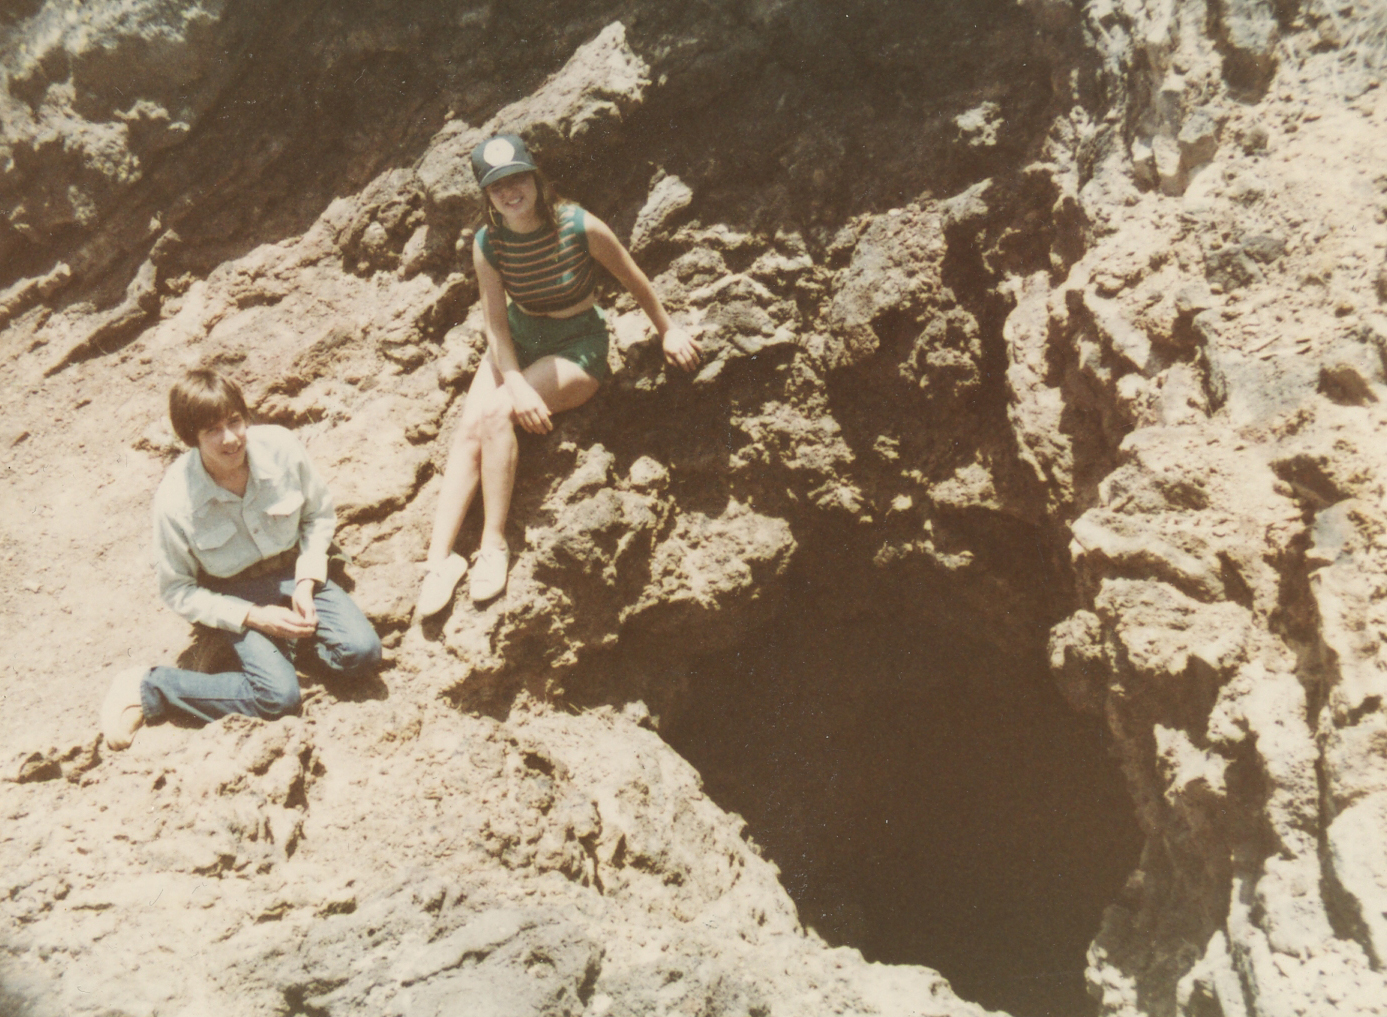 Lito Bujanda-Moore and Ann James Massey beside the fumarole in Aden Crater on a camping trip with Lito's dad and Ann's uncle, Tom Moore. Tom had been a staff cartoonist for Archie comics.
Photo  ©1982 Tom Moore